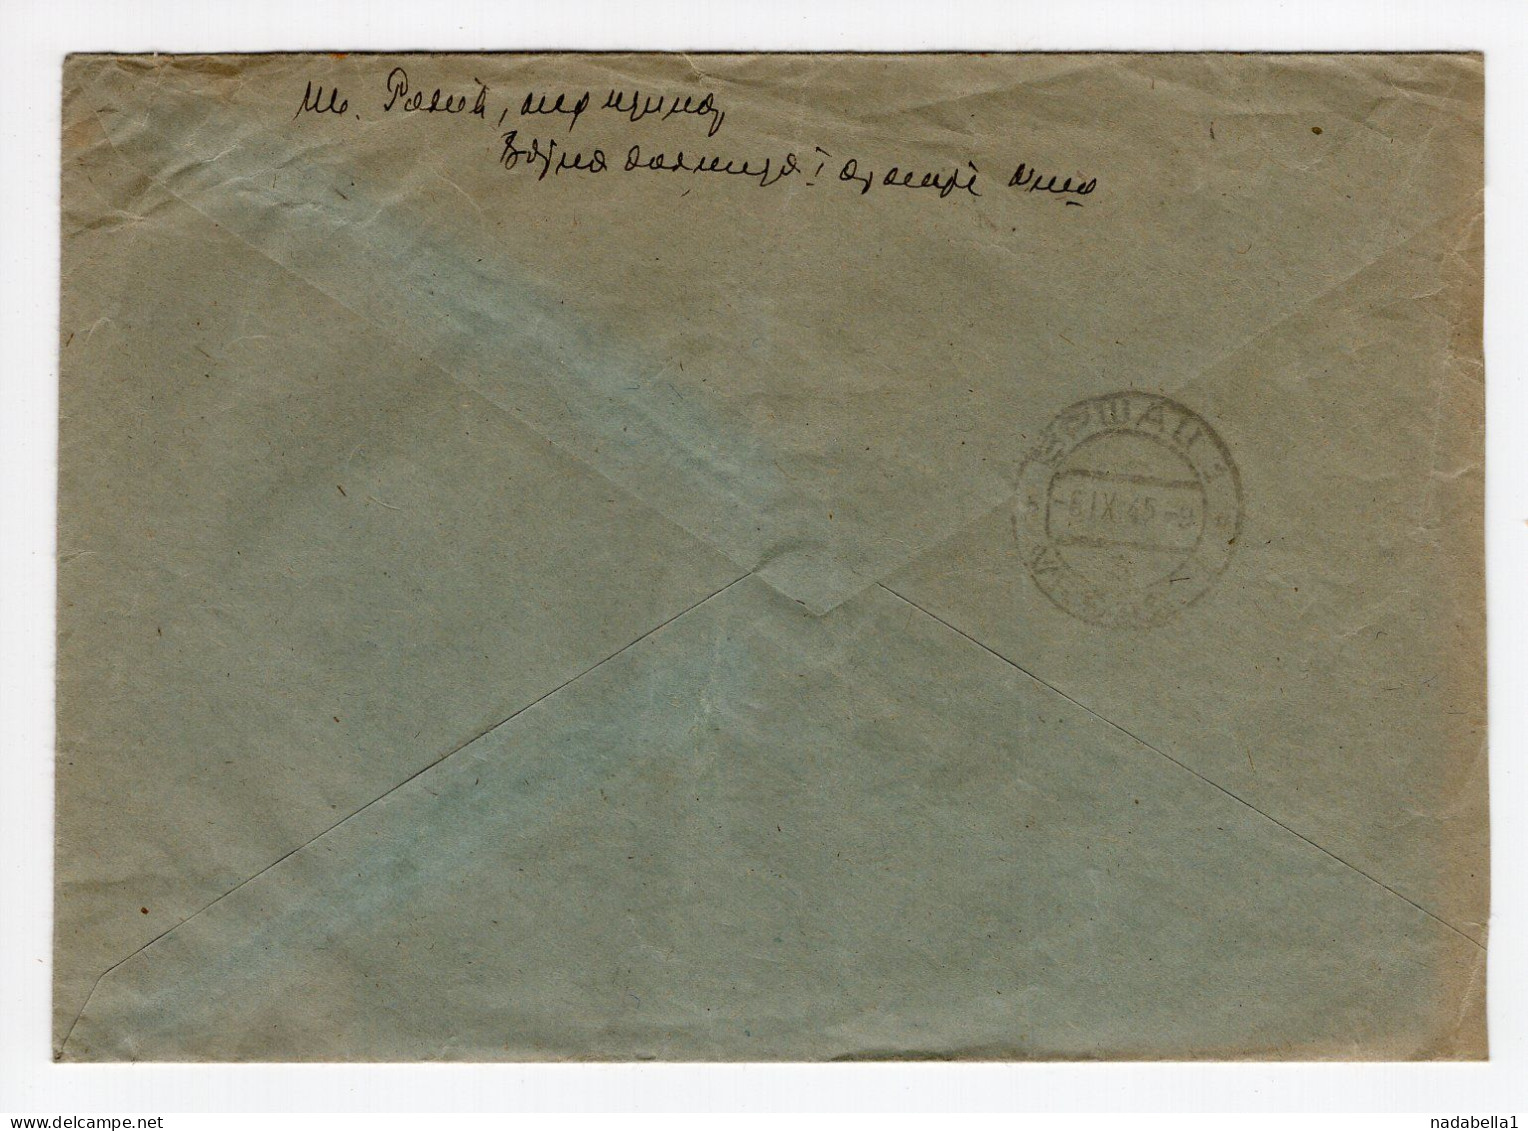 03.9.1945. YUGOSLAVIA,SERBIA,NIŠ TO VRSAC COVER,MILITARY MAIL,4 DIN. POSTAGE DUE - Postage Due